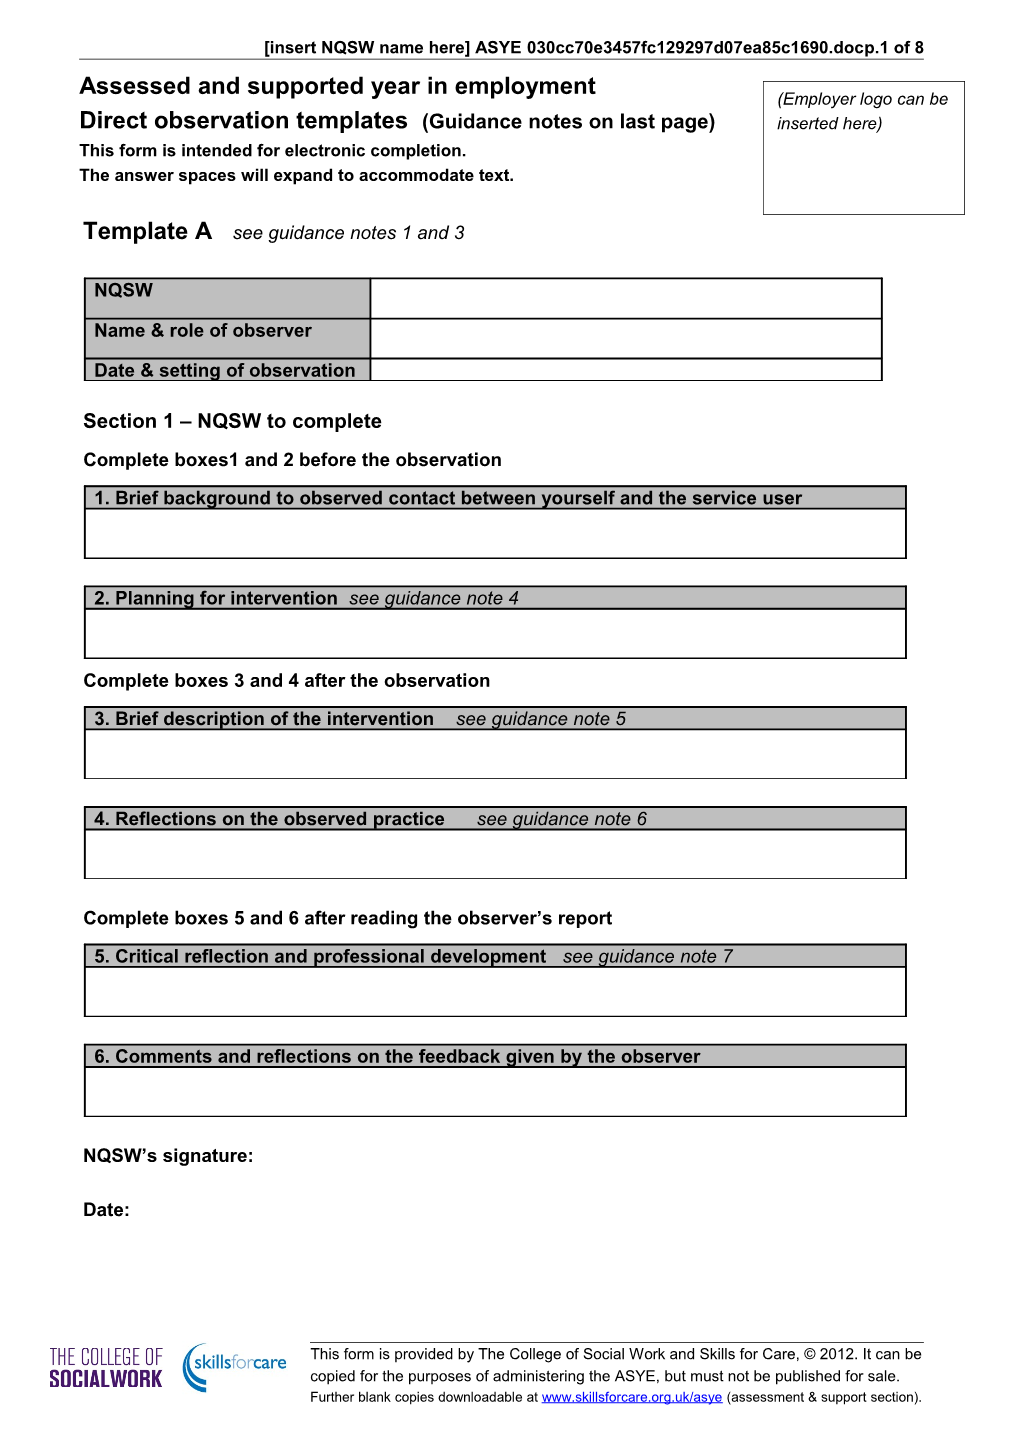 Direct Observation Template